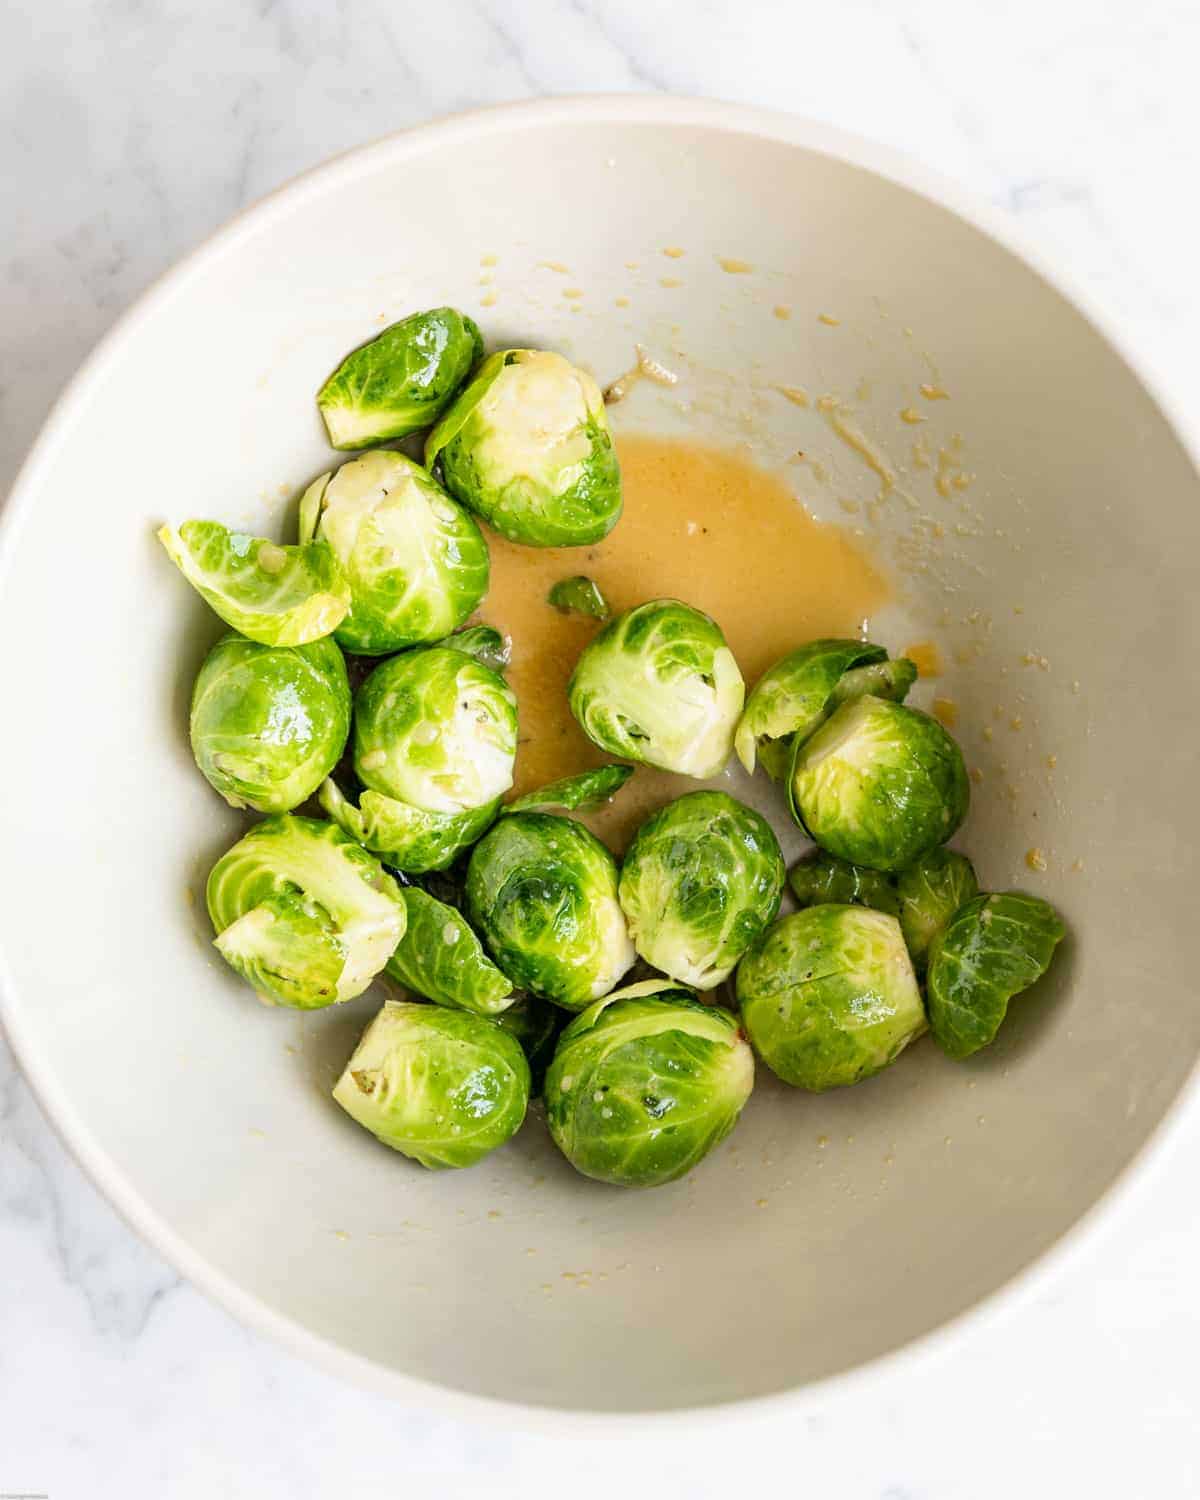 Trimmed Brussels sprouts in a bowl with dressing.